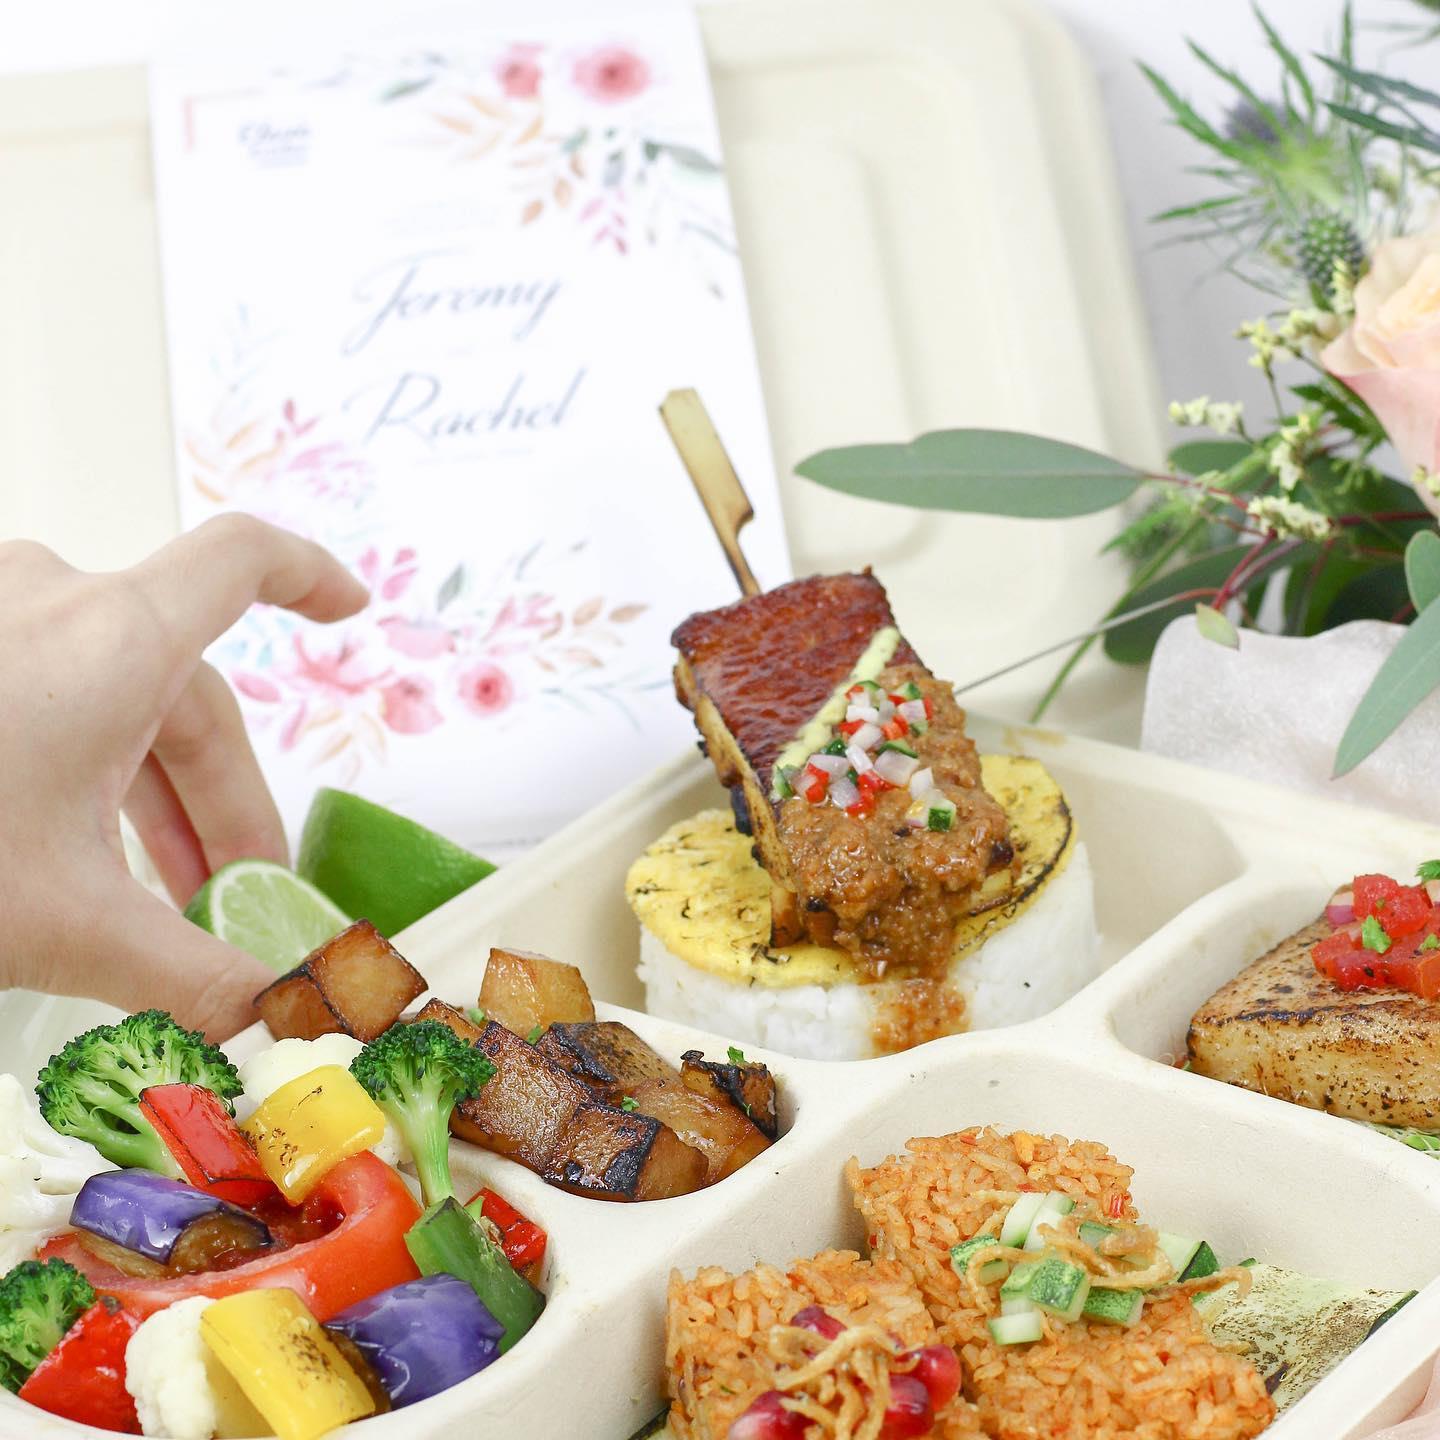 5 Halal Caterers in SG to Whet Your Appetite on Your Wedding